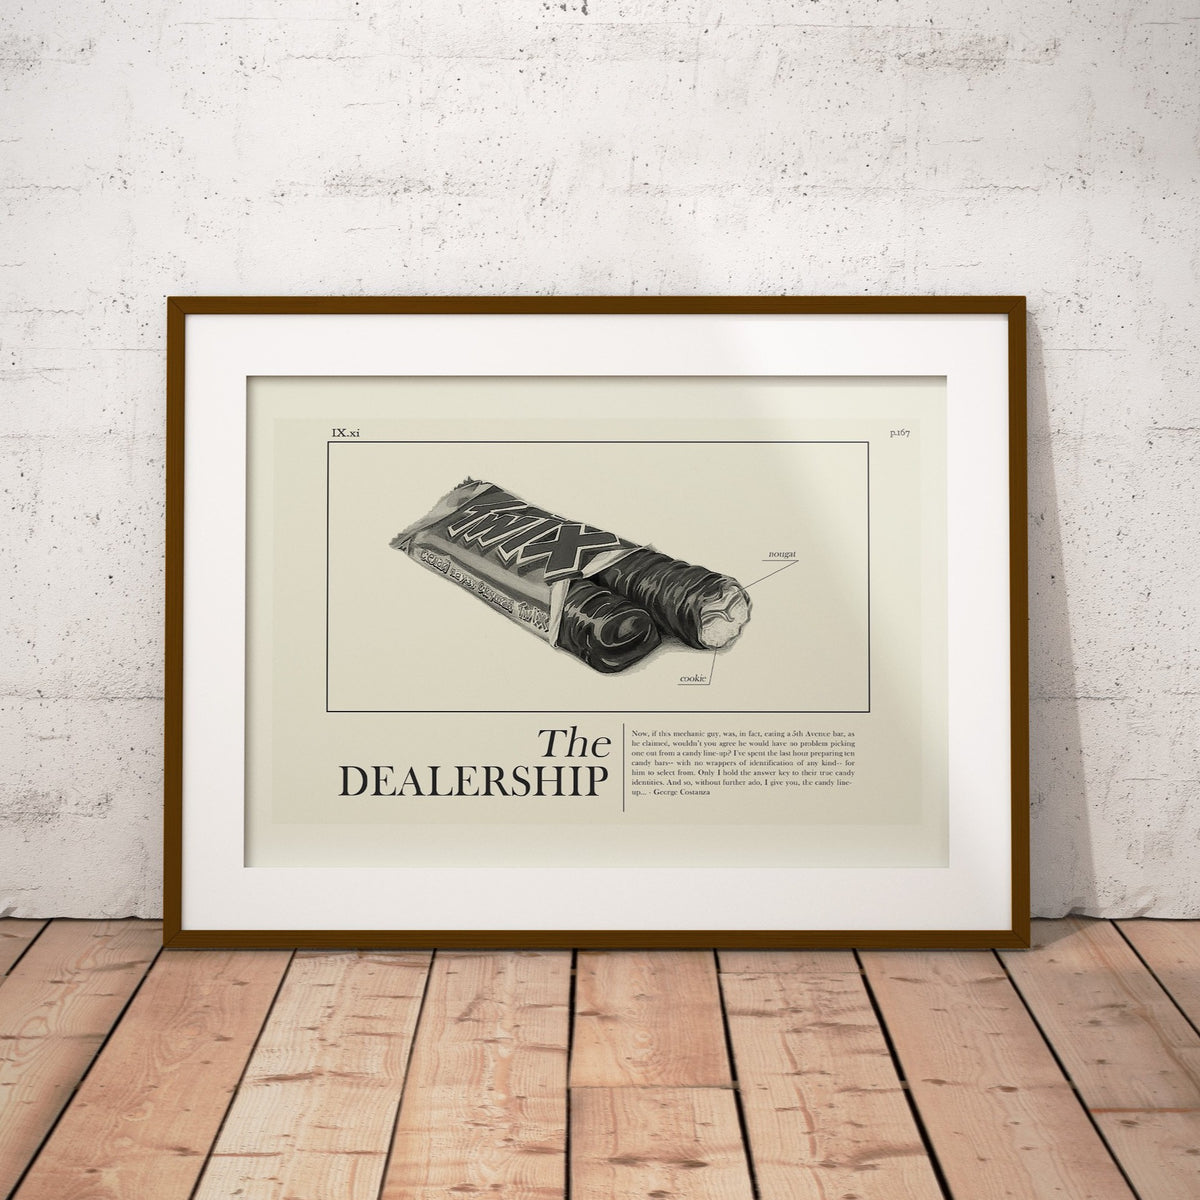 Seinfeld "The Dealership" Schematic  | 12"x18" or 18"x24" Print only